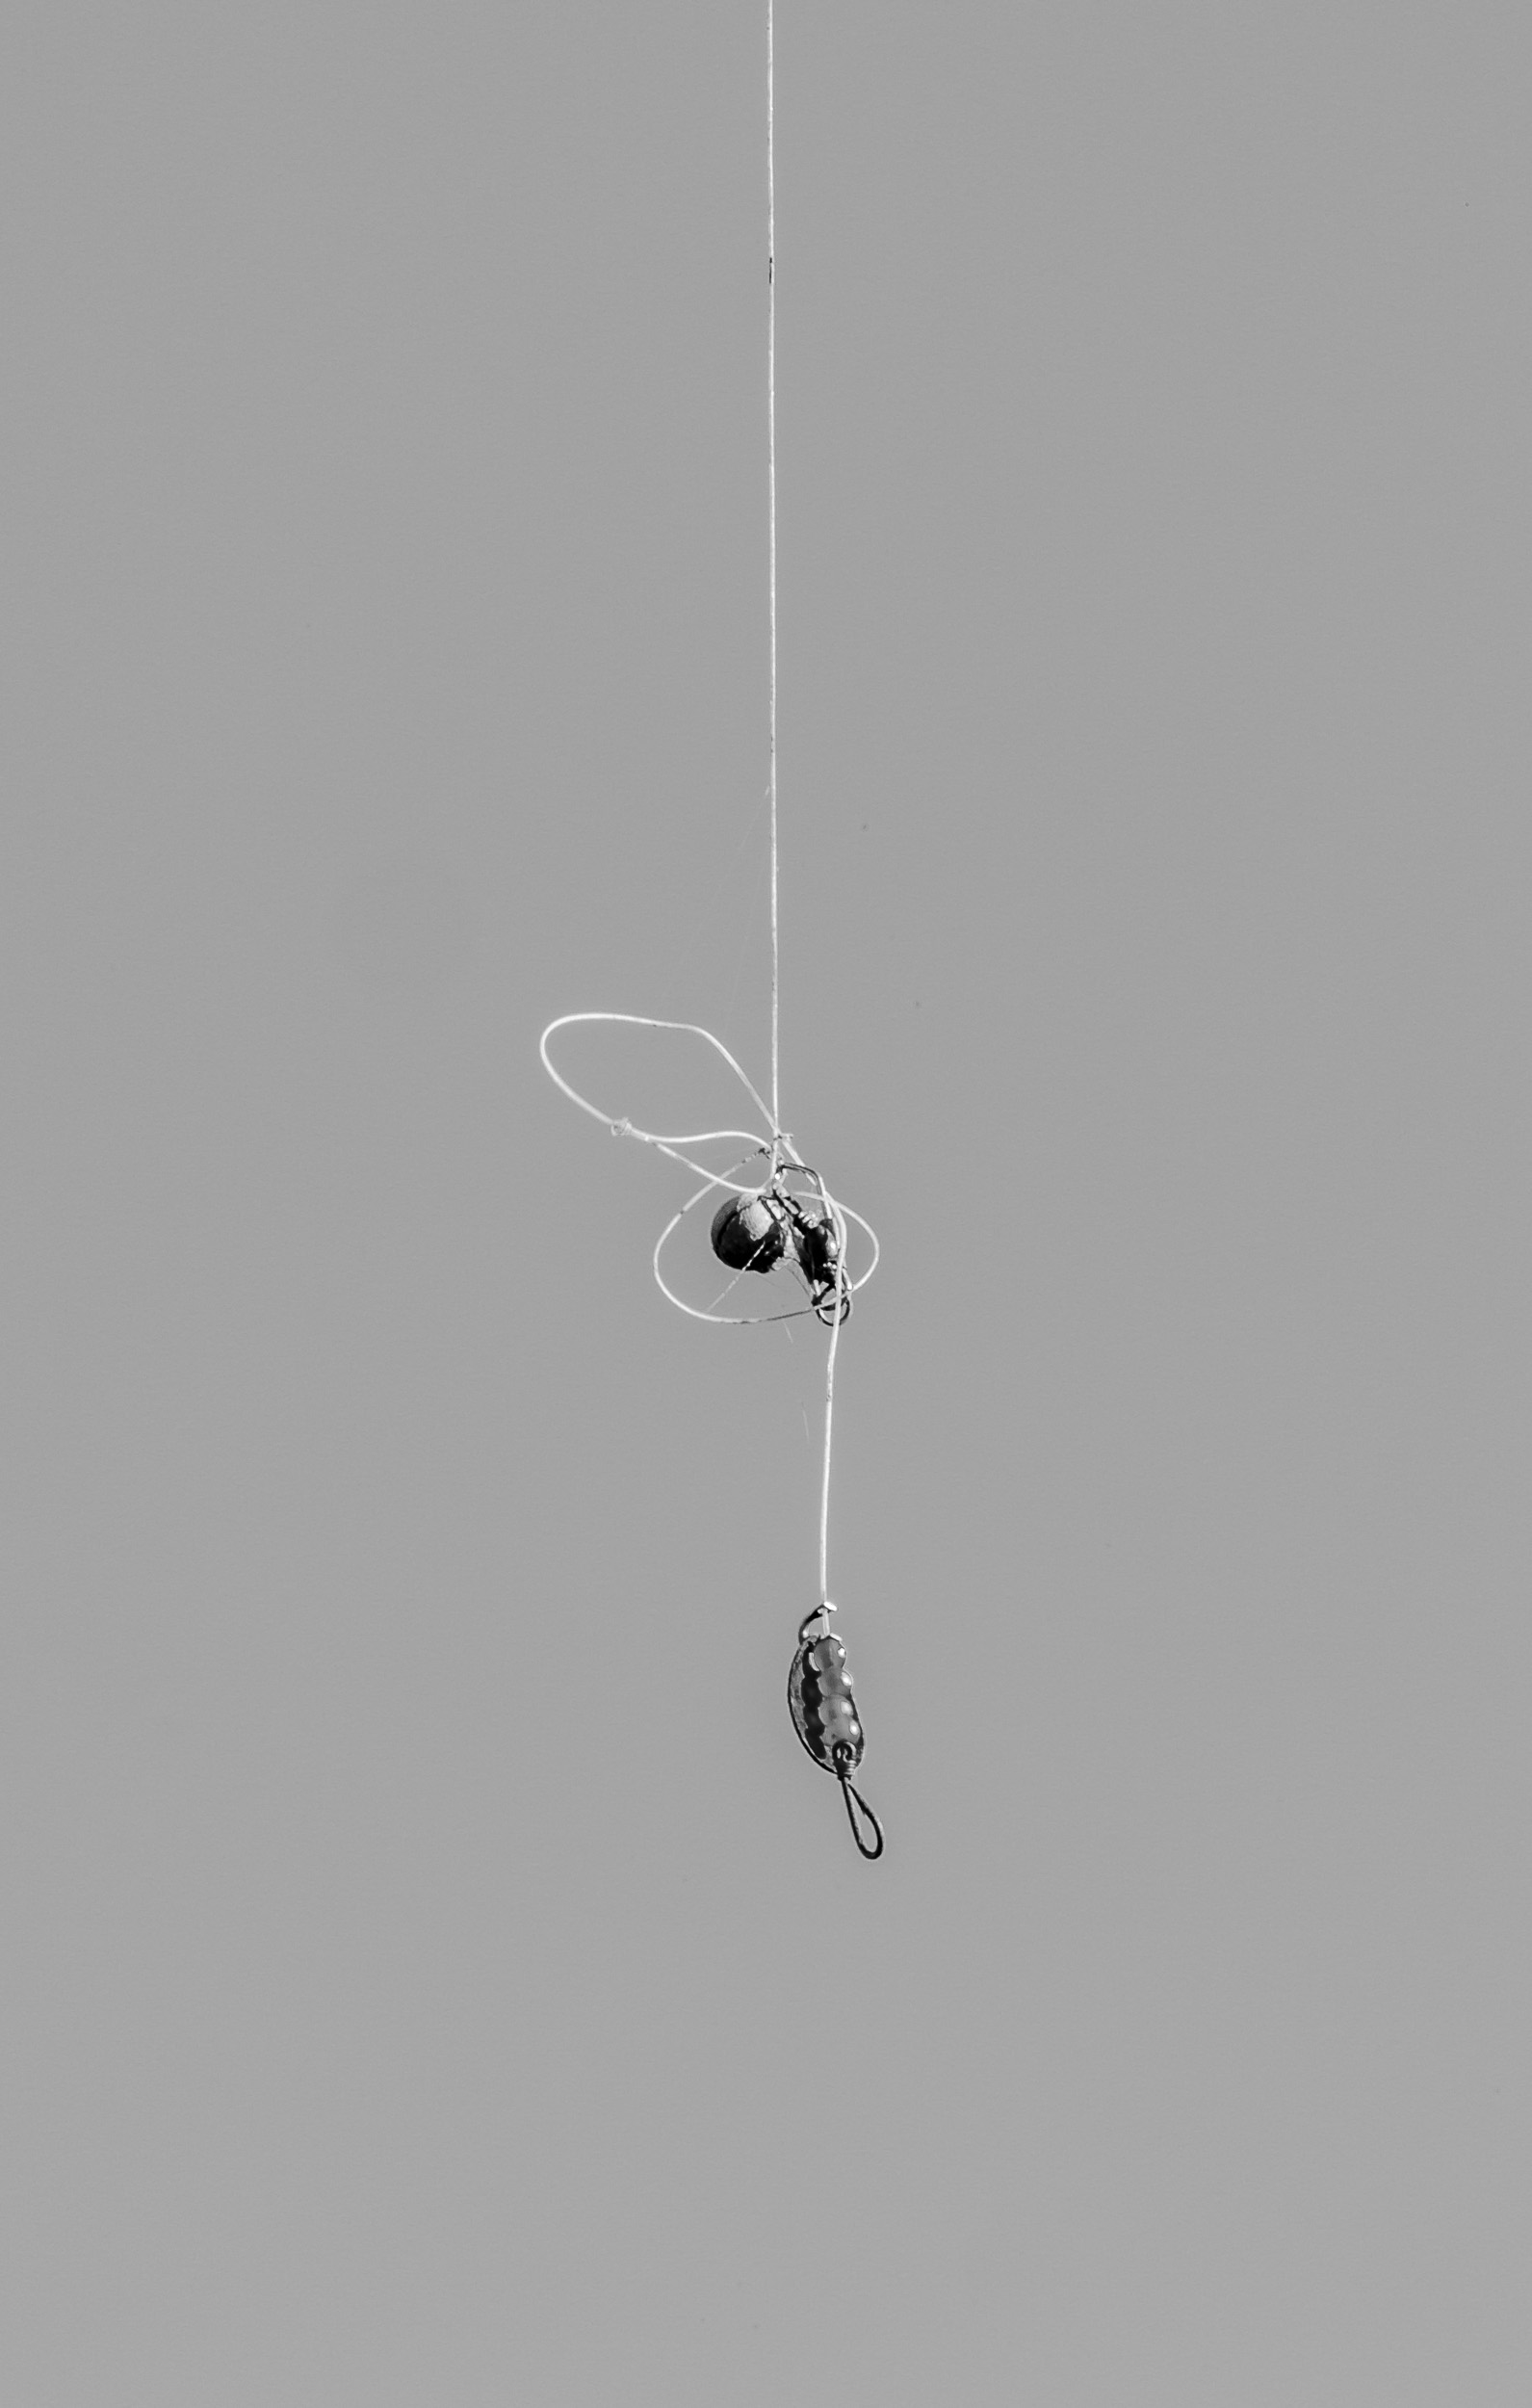 small fishing lure and two weights hanging from single strand of fishing line